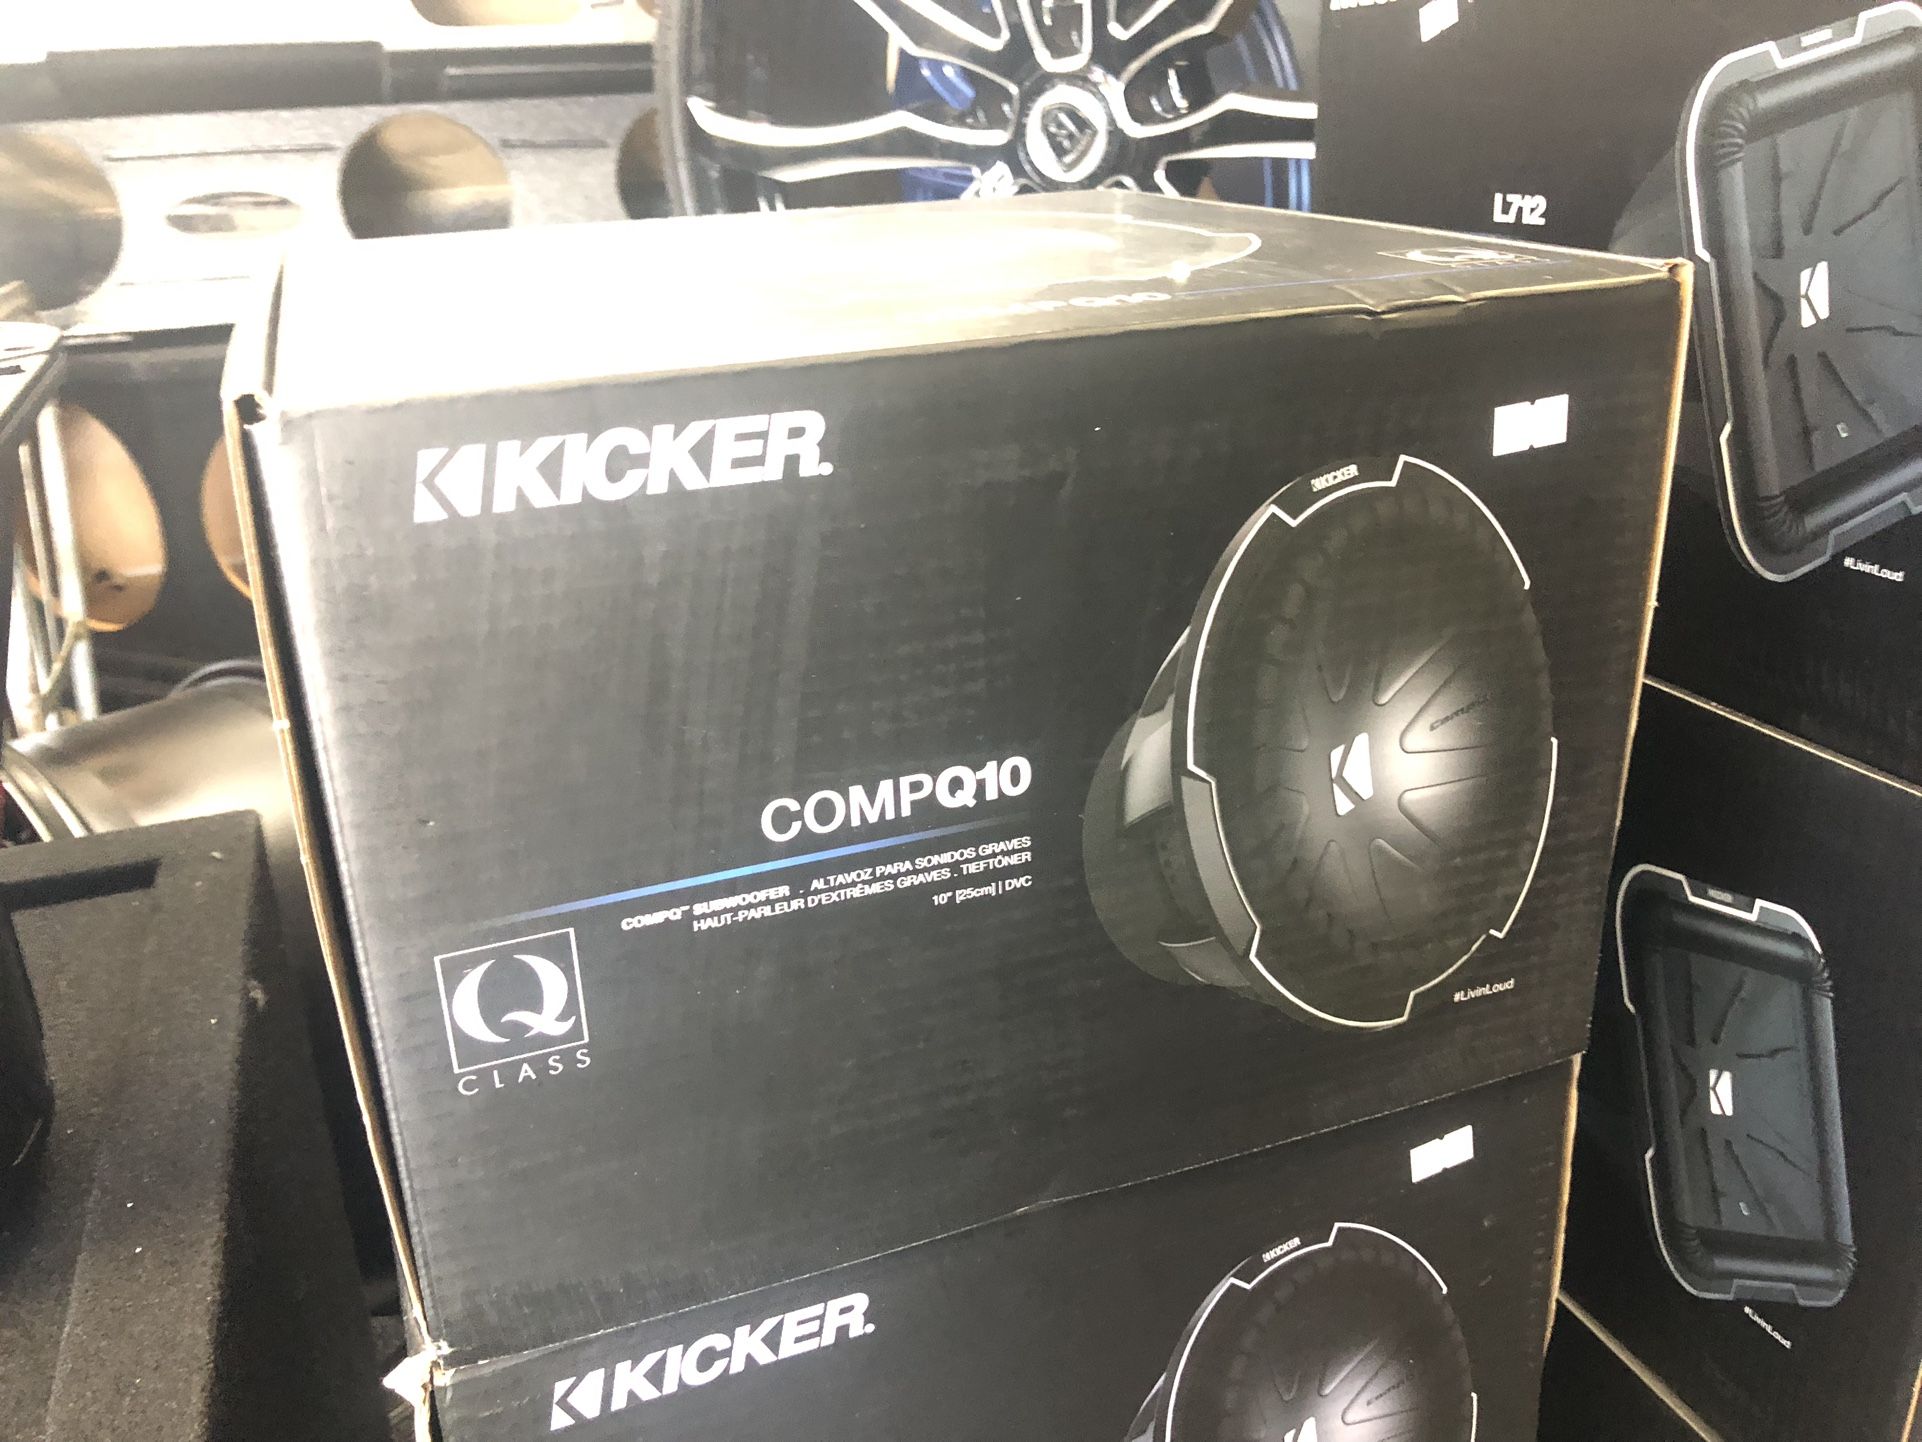 Kicker CompQ 10 On Sale Today For 229.99